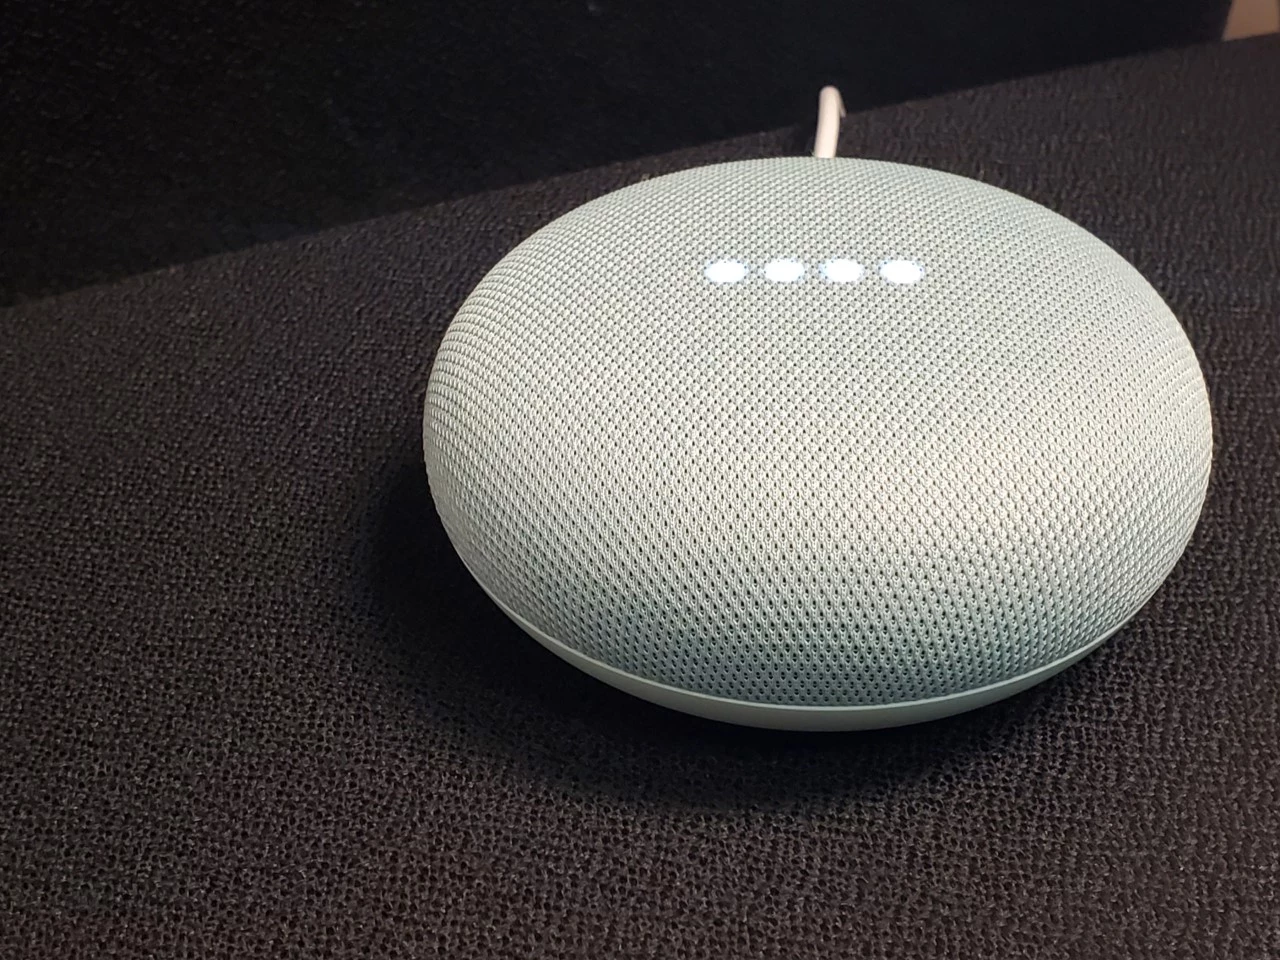 Cool 98.7 On Google Home